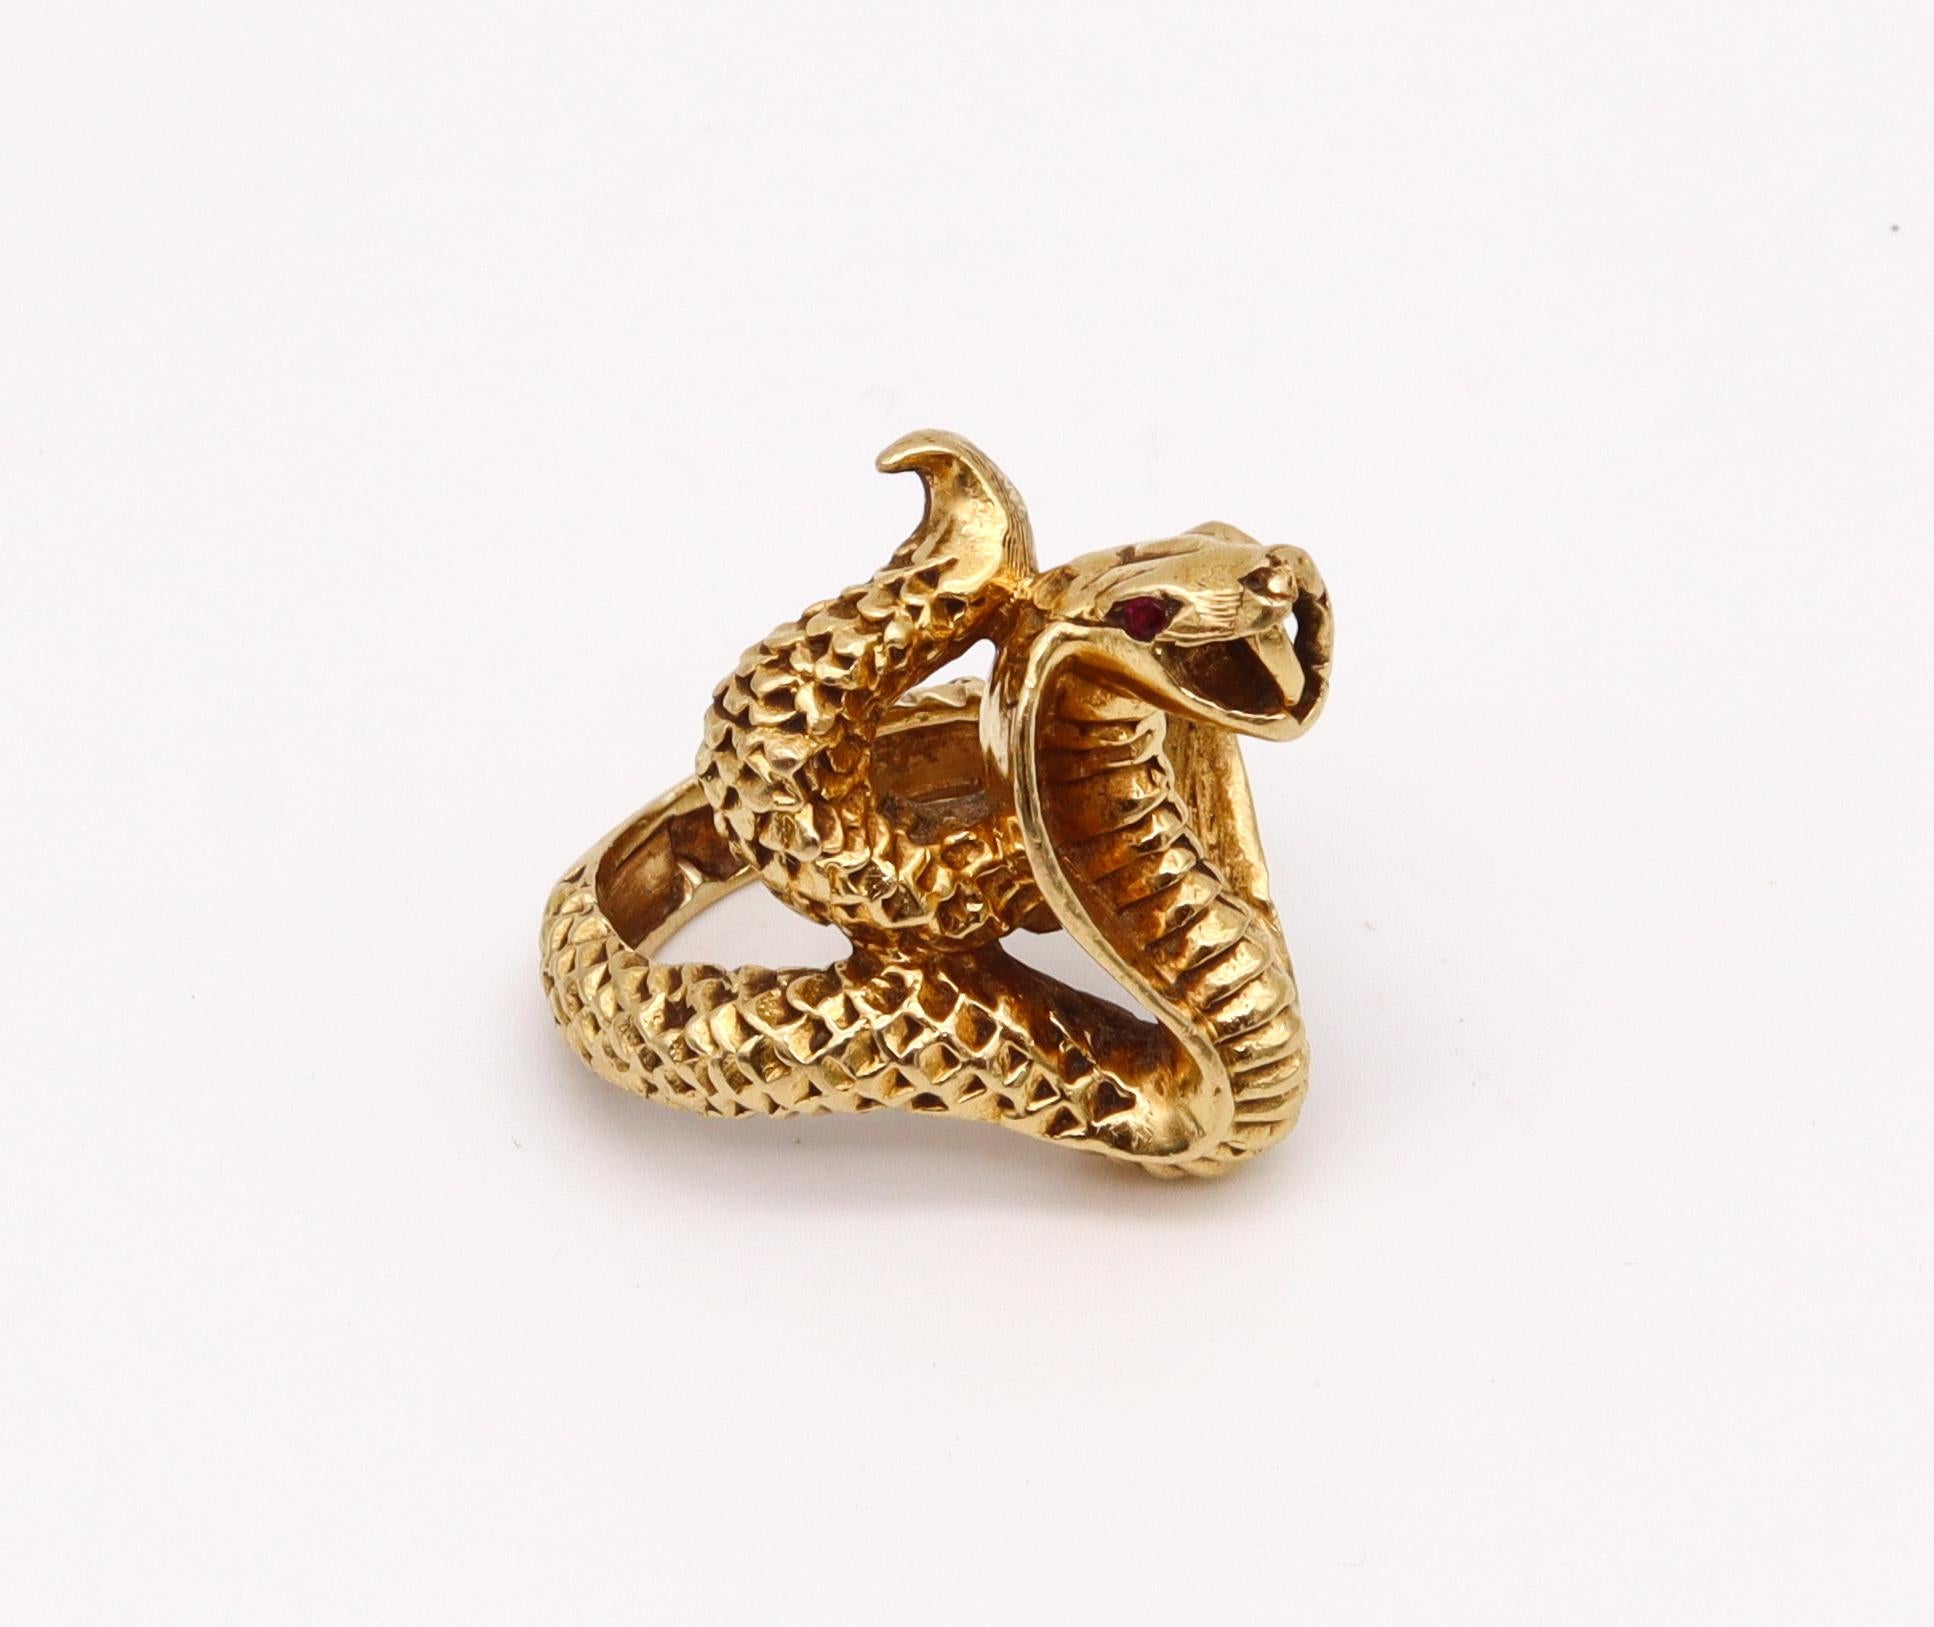 Women's or Men's Egyptian Revival 1930 Art Deco Sculpted Cobra Ring 18Kt Yellow Gold with Rubies